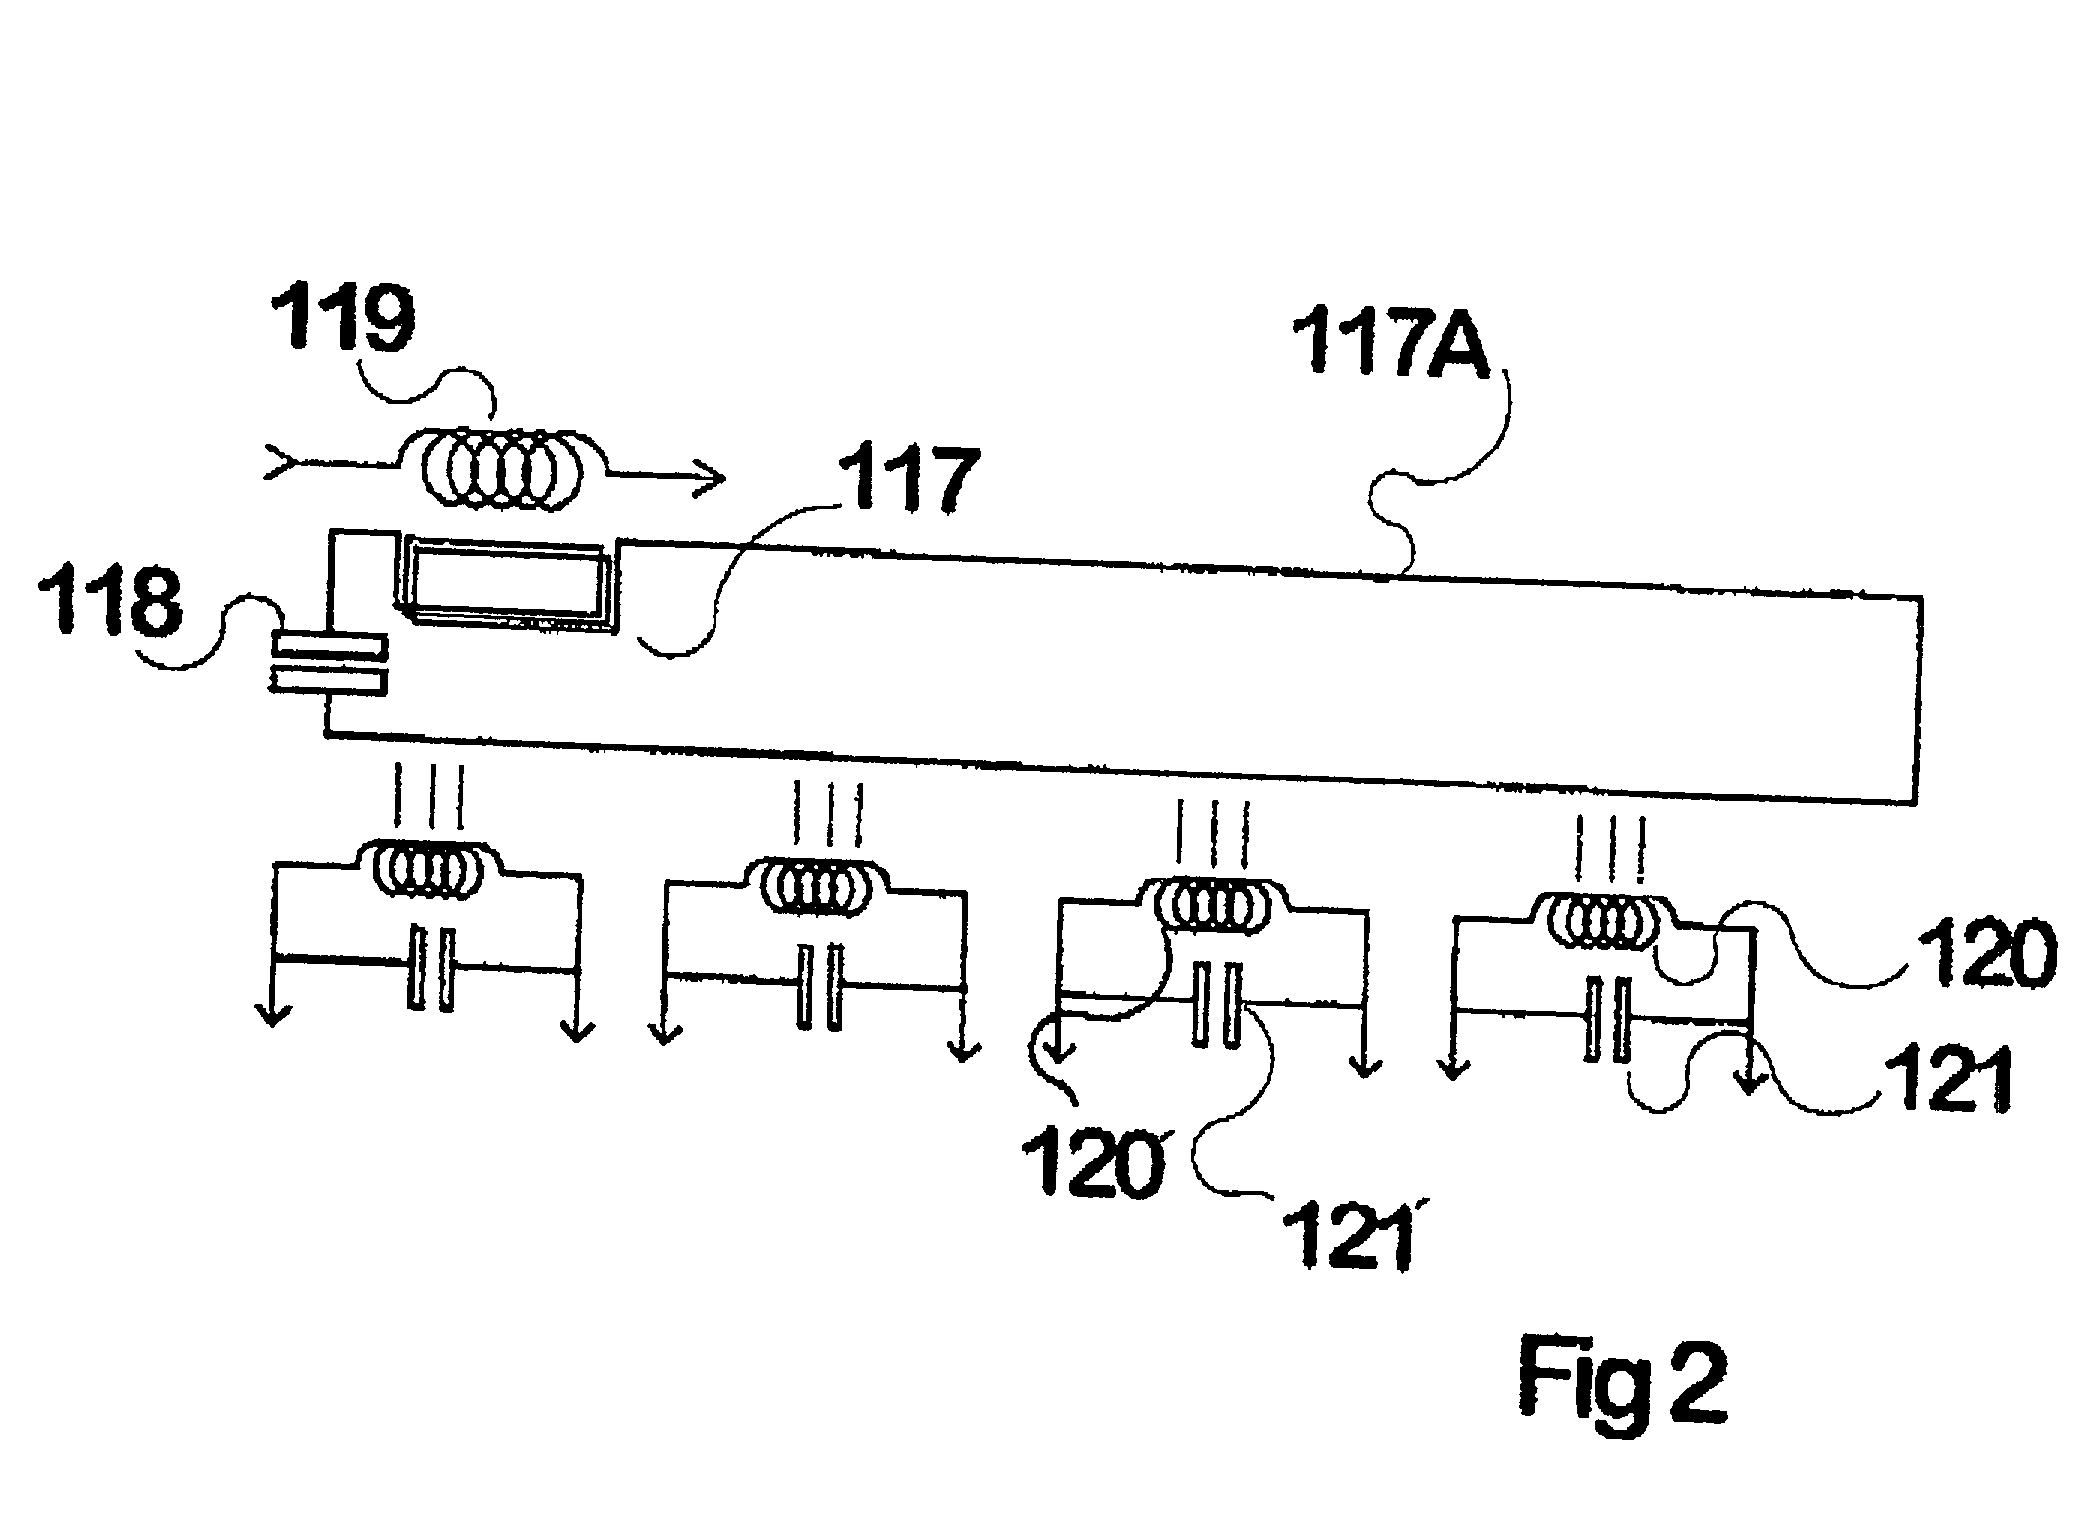 Inductive power distribution system